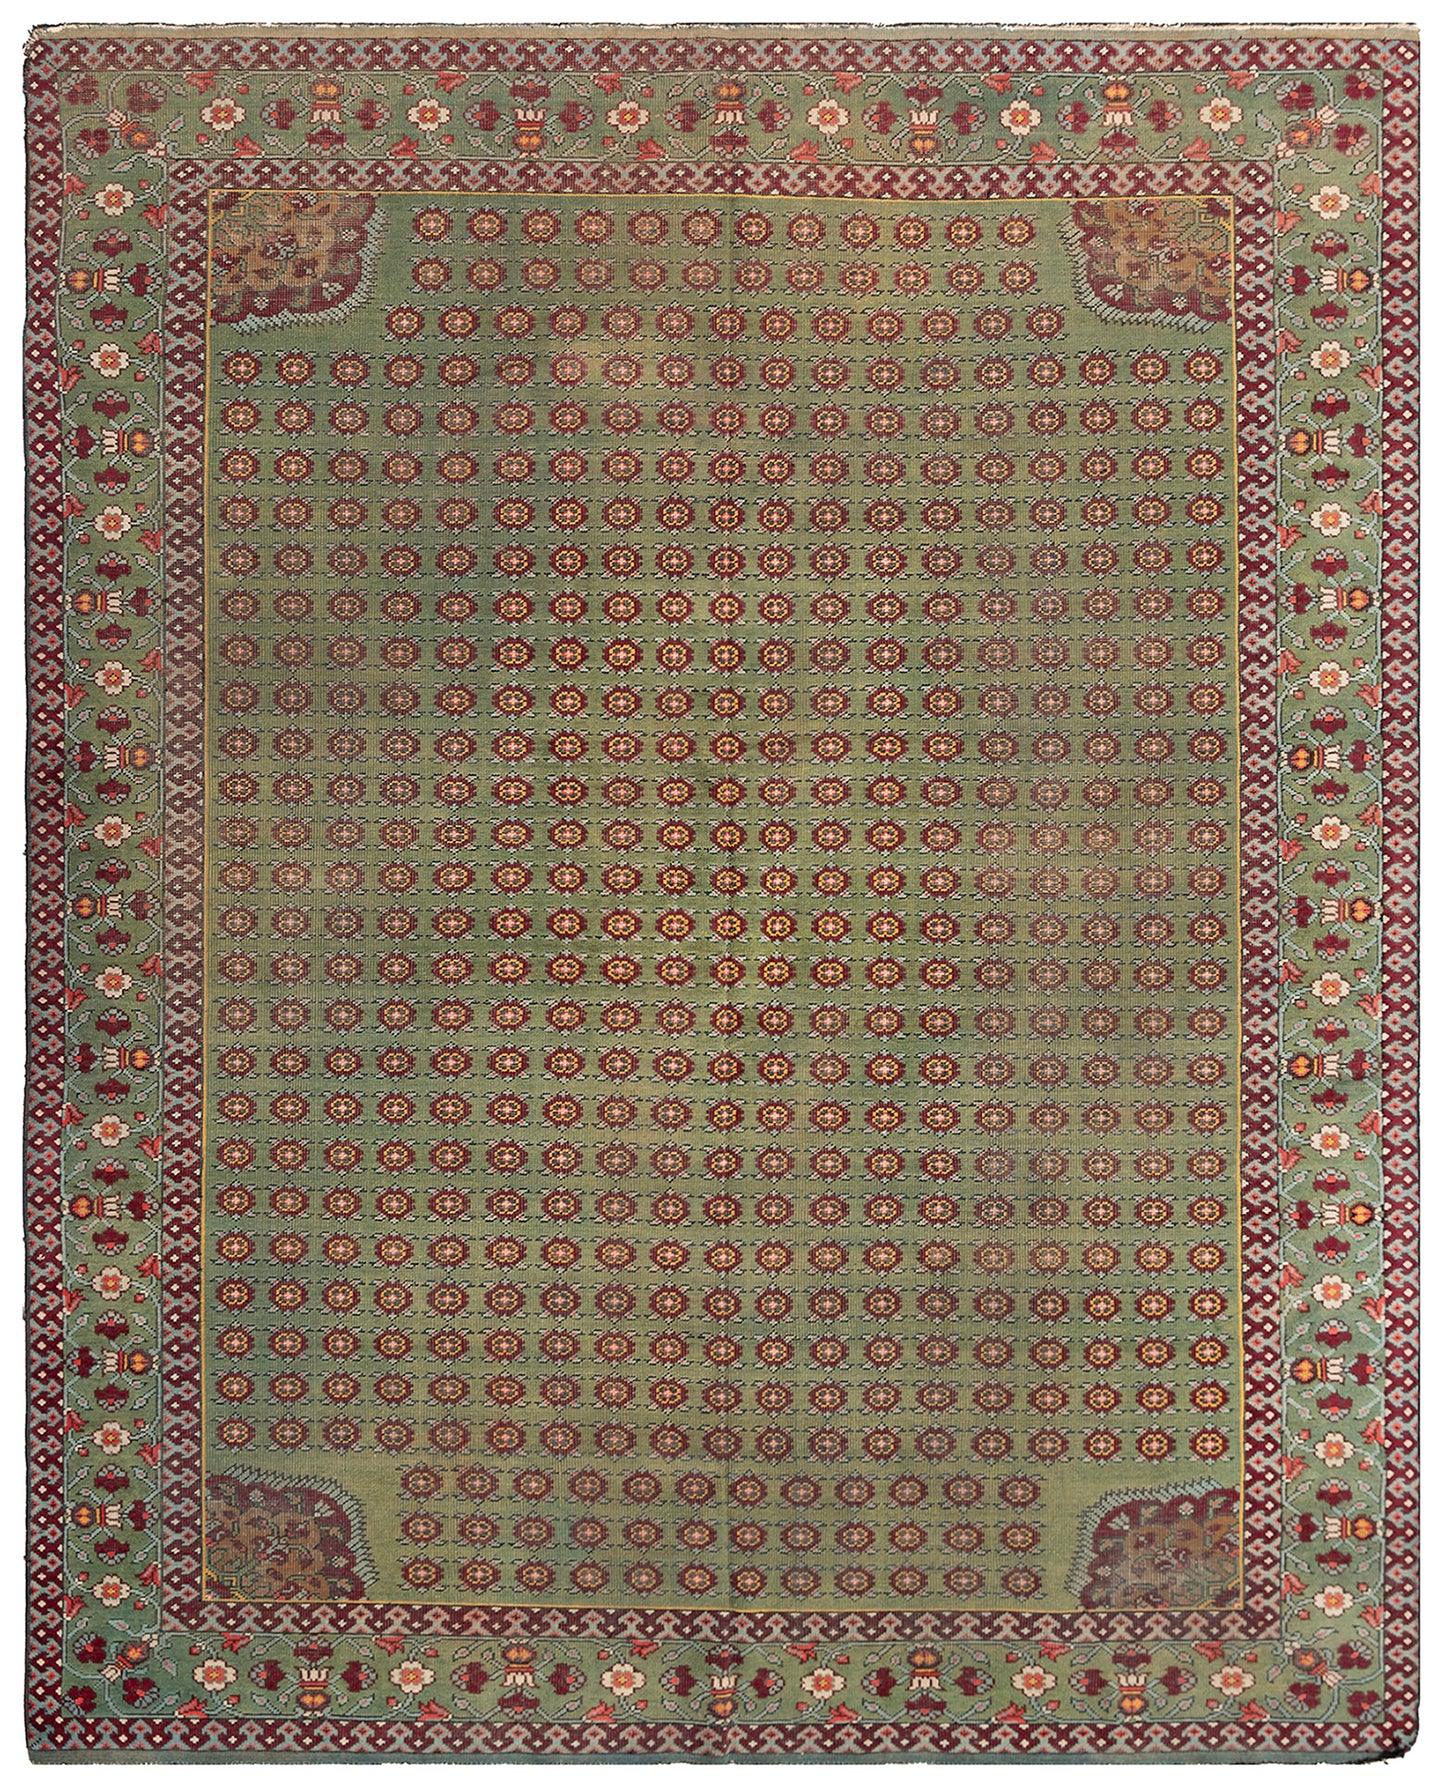 10'x13' Green and Red Geometric Antique English Hand-knotted Rug